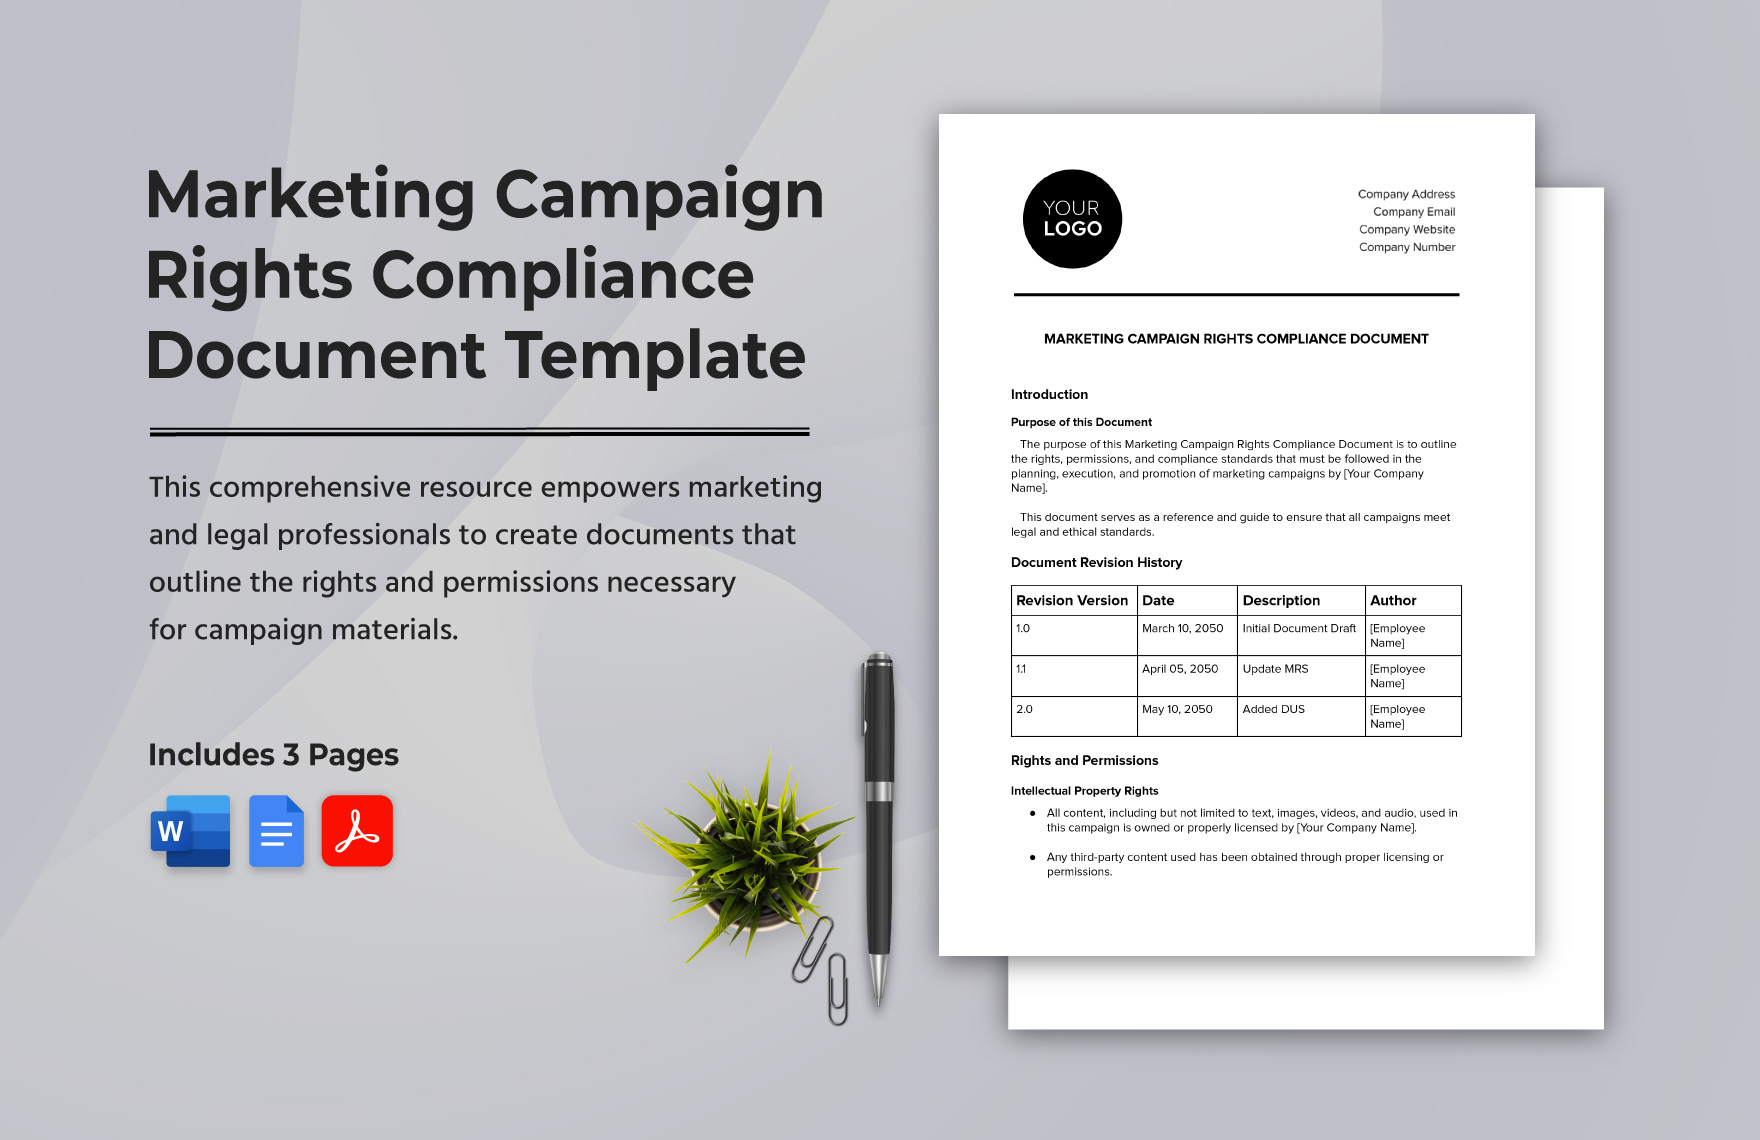 Marketing Campaign Rights Compliance Document Template in Word, Google Docs, PDF